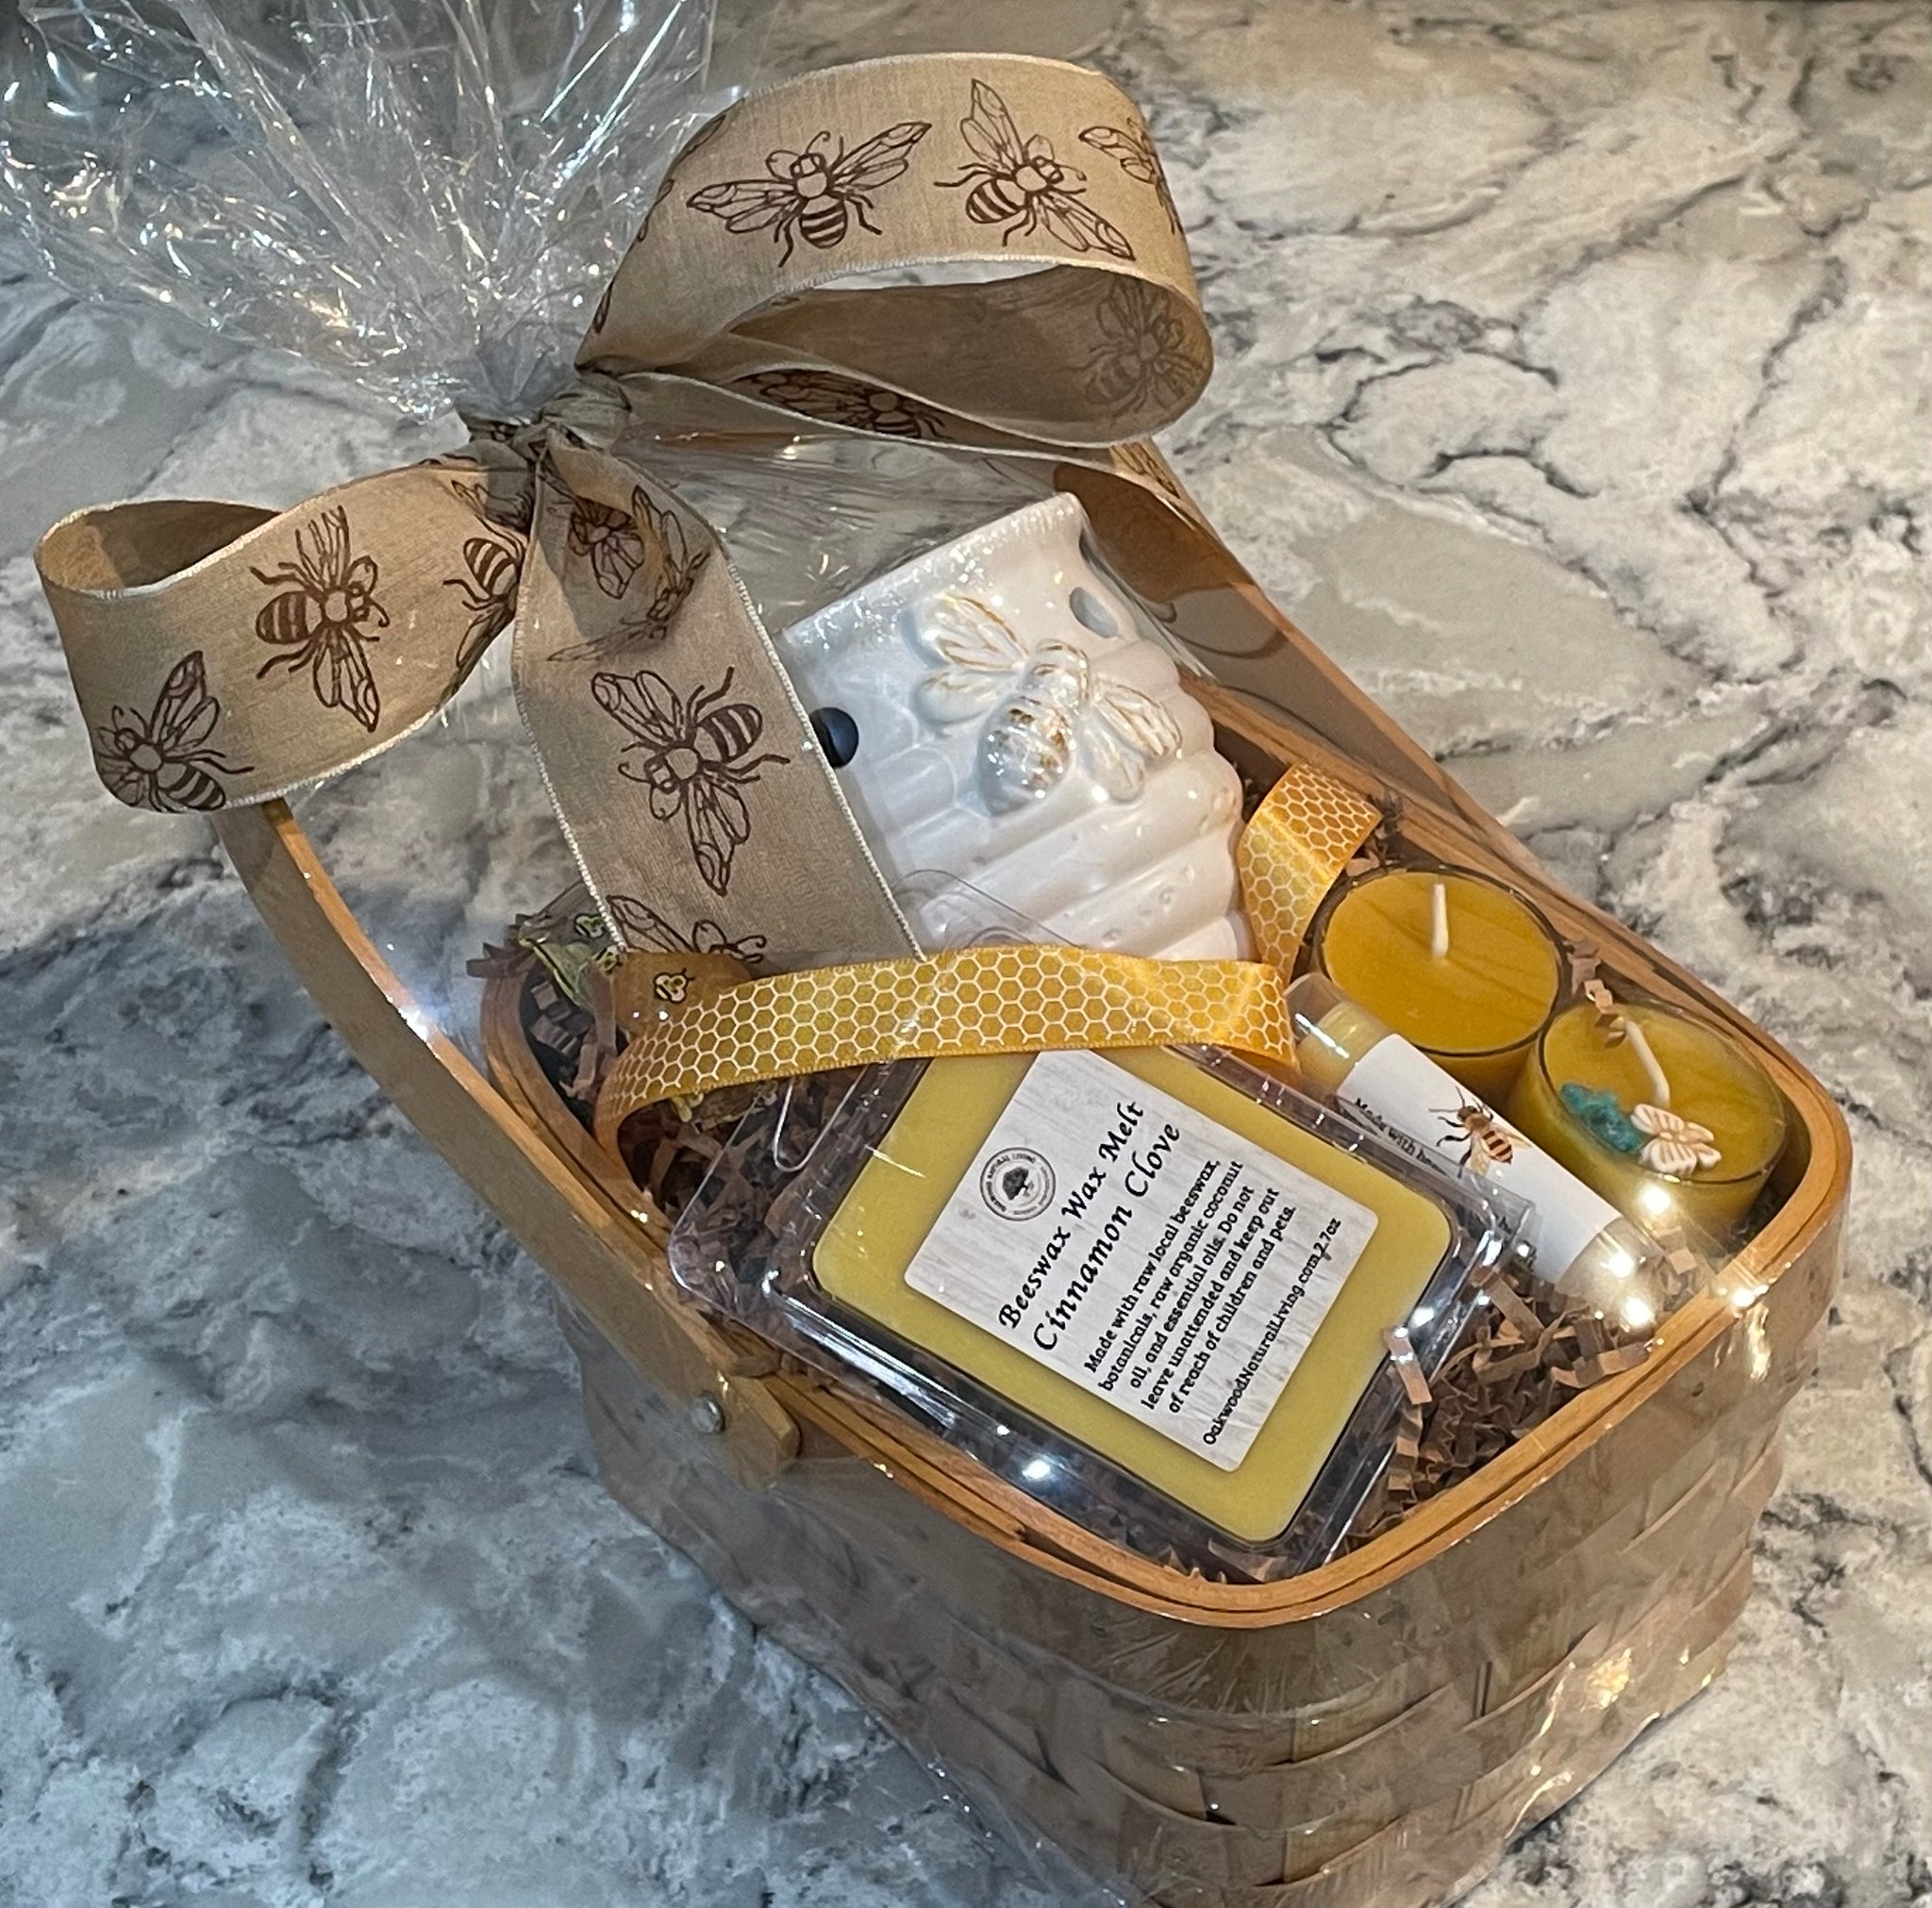 Country Garden Wax Melts Gift Set with Bee Hive Melter - The